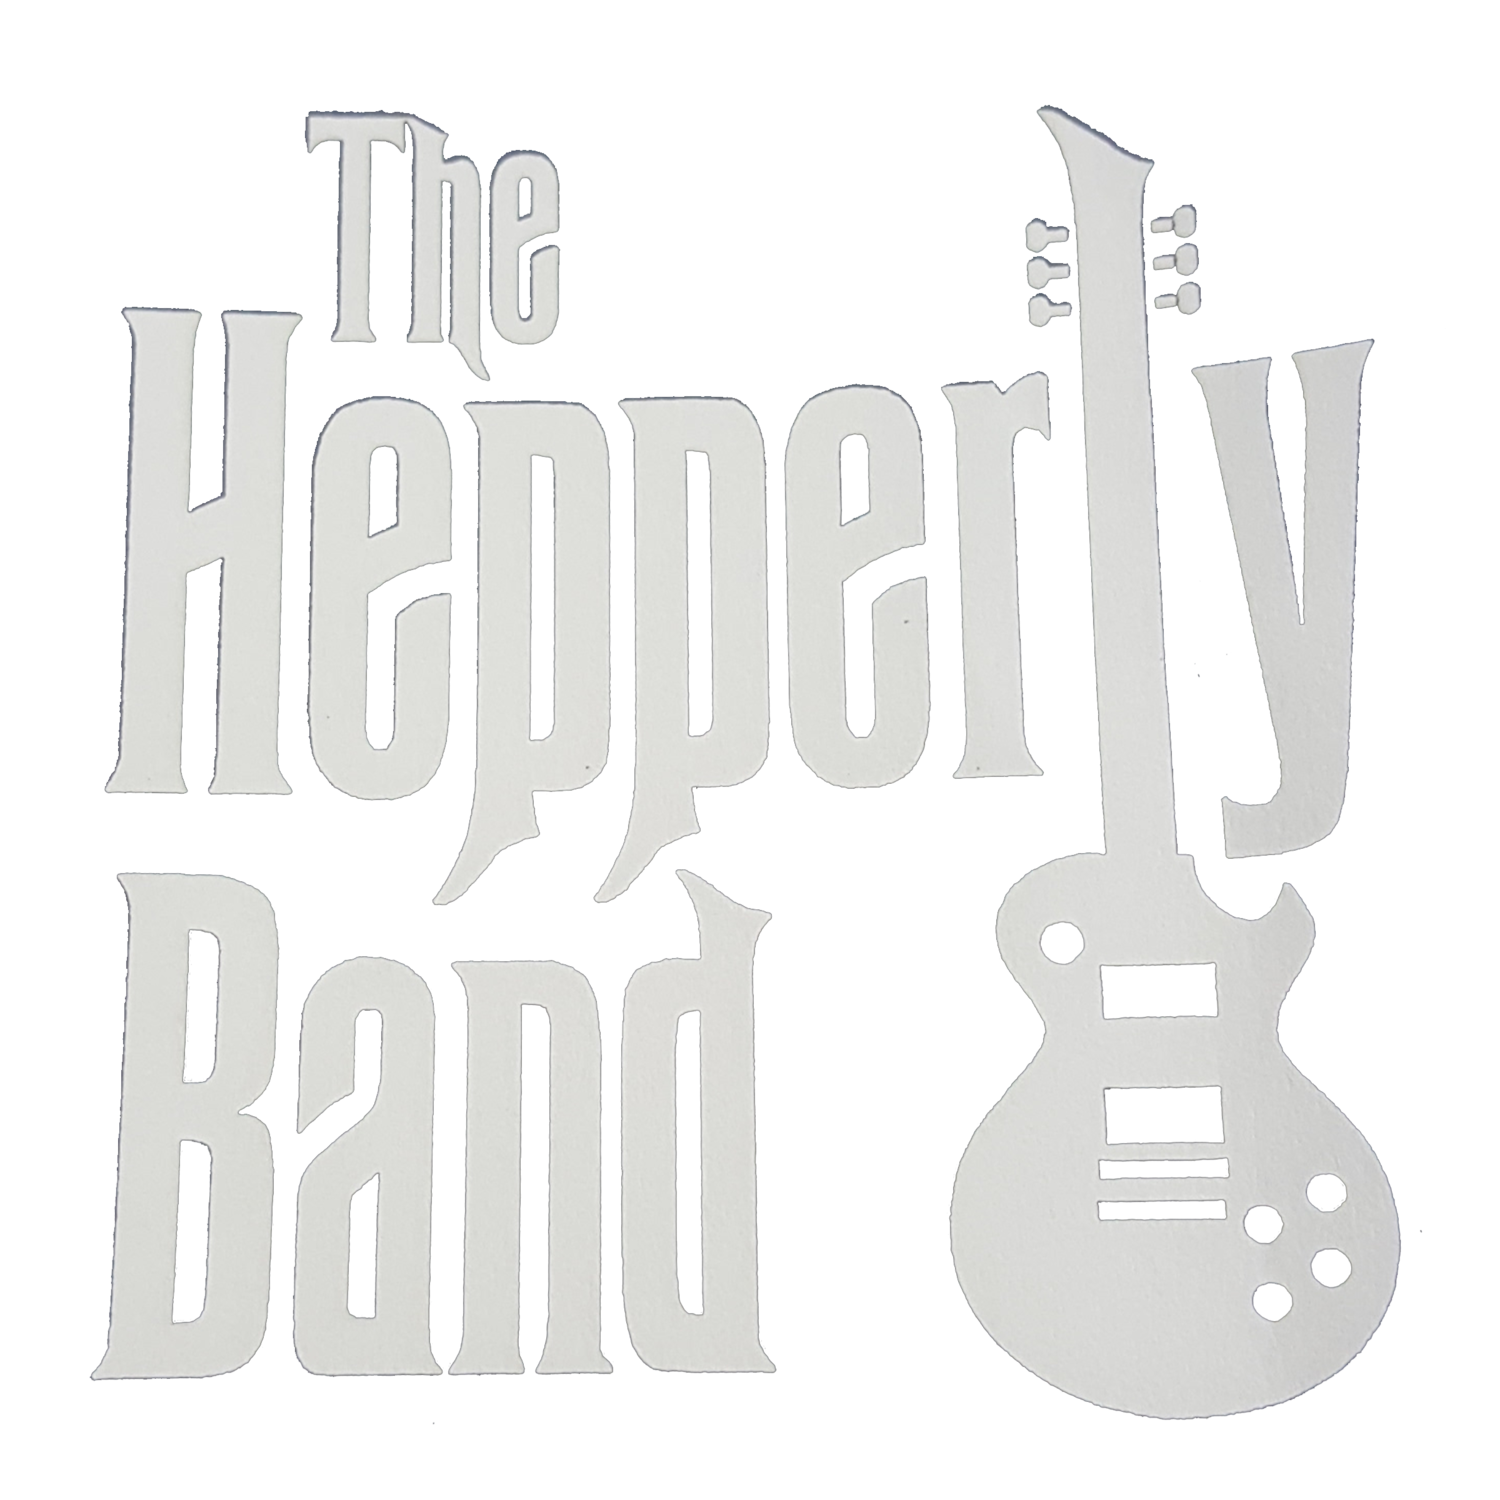 The Hepperly Band